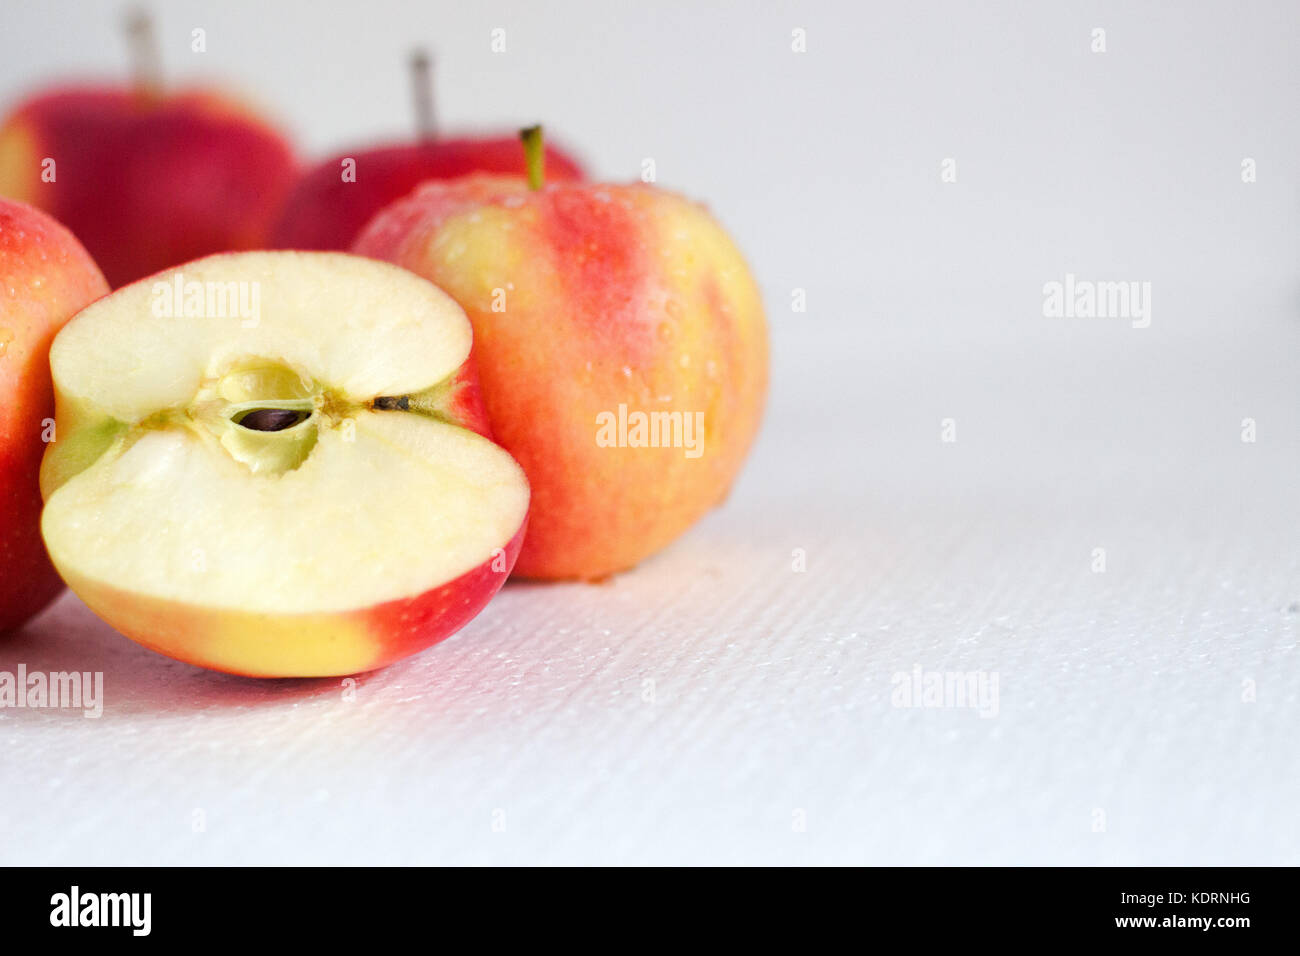 Red apple, half apple and quarter apple on white background. healthy food concept Stock Photo